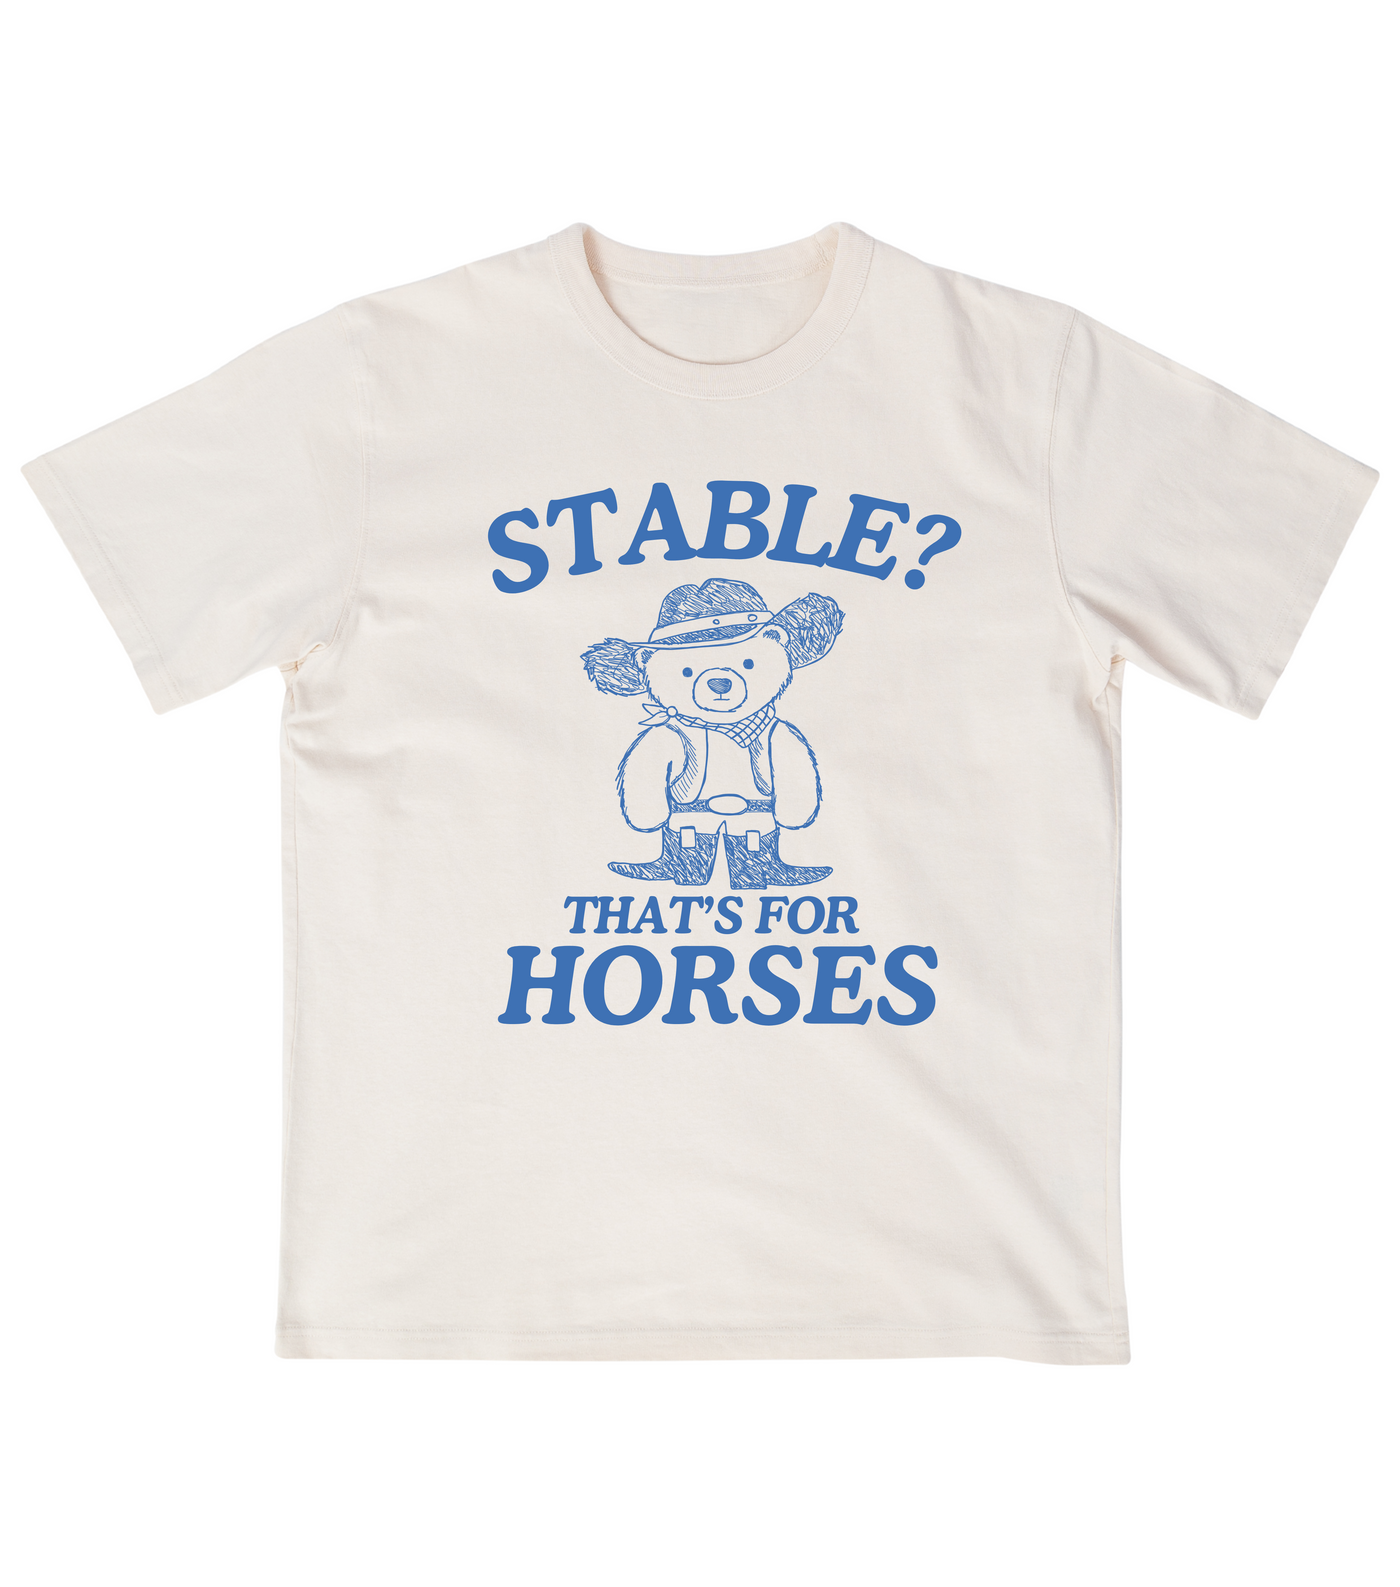 Stable? That's For Horses